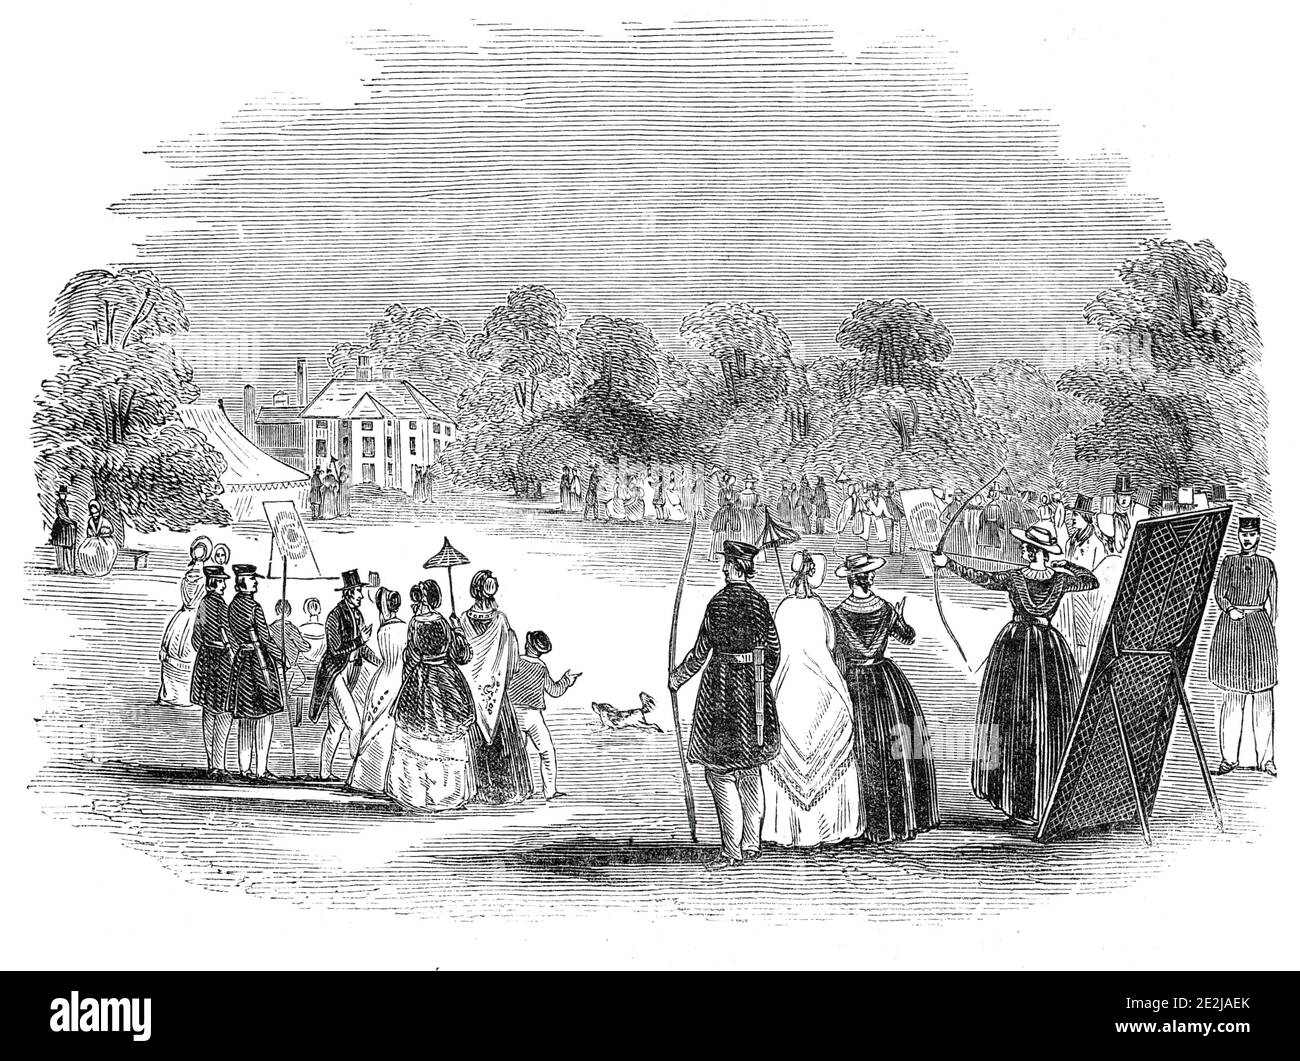 Bow-meeting at Pradoe, near Oswestry, 1844. Competitors at '...an elegant archery fete at Pradoe [in Shropshire], the delightful seat of the Hon. Thomas Kenyon, when the Royal British Bowmen made a very interesting display of their prowess...The shooting proceeded with vigour and animation, the ladies taking from target to target the distance of sixty yards, and the gentlemen one hundred. Strong and anxious was the interest excited whenever an arrow pierced near the bull's eye'. From &quot;Illustrated London News&quot;, 1844, Vol V. Stock Photo